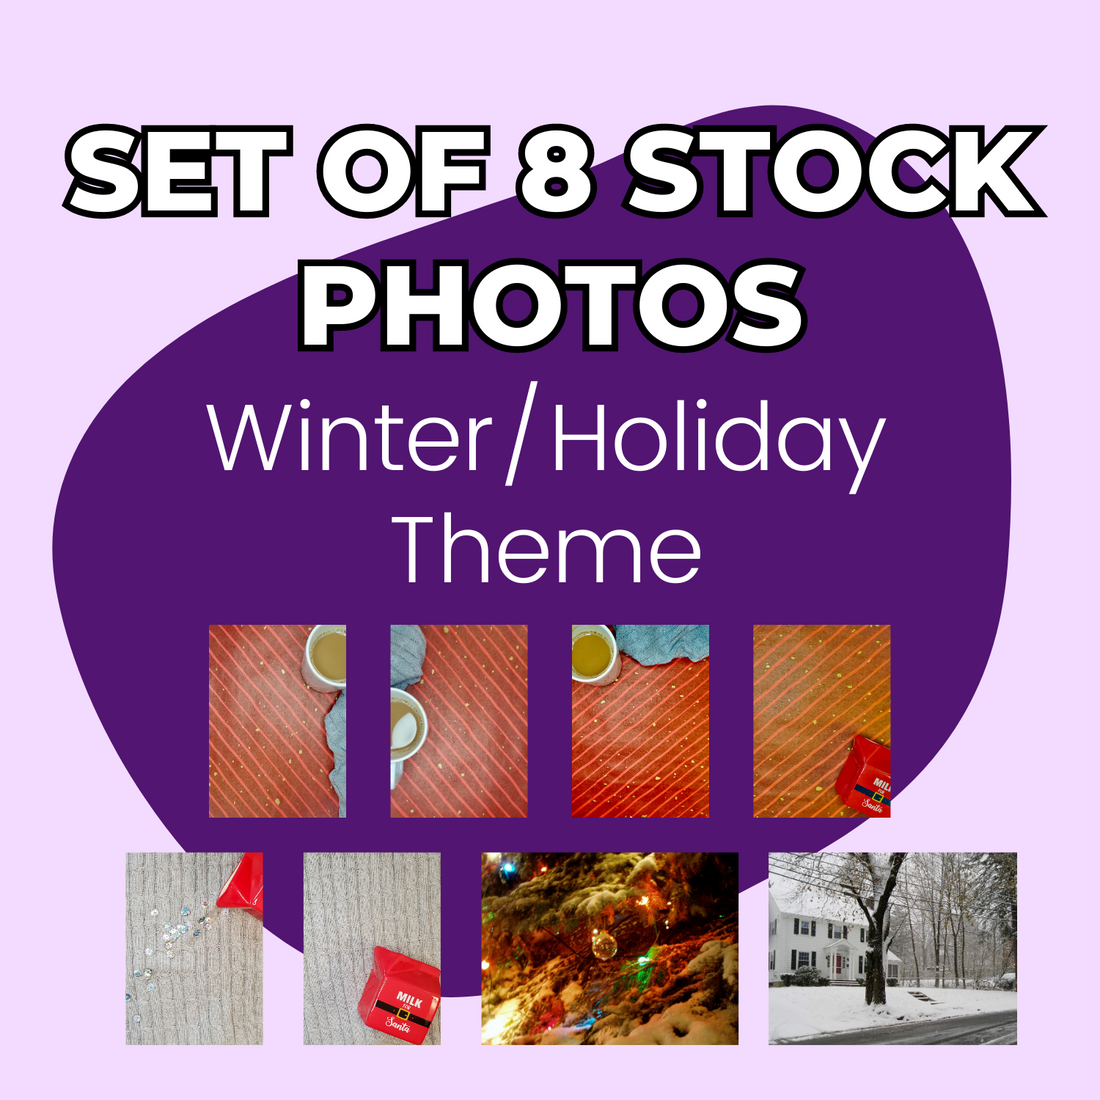 Winter and Holiday Themed Stock Photos (set of 8)